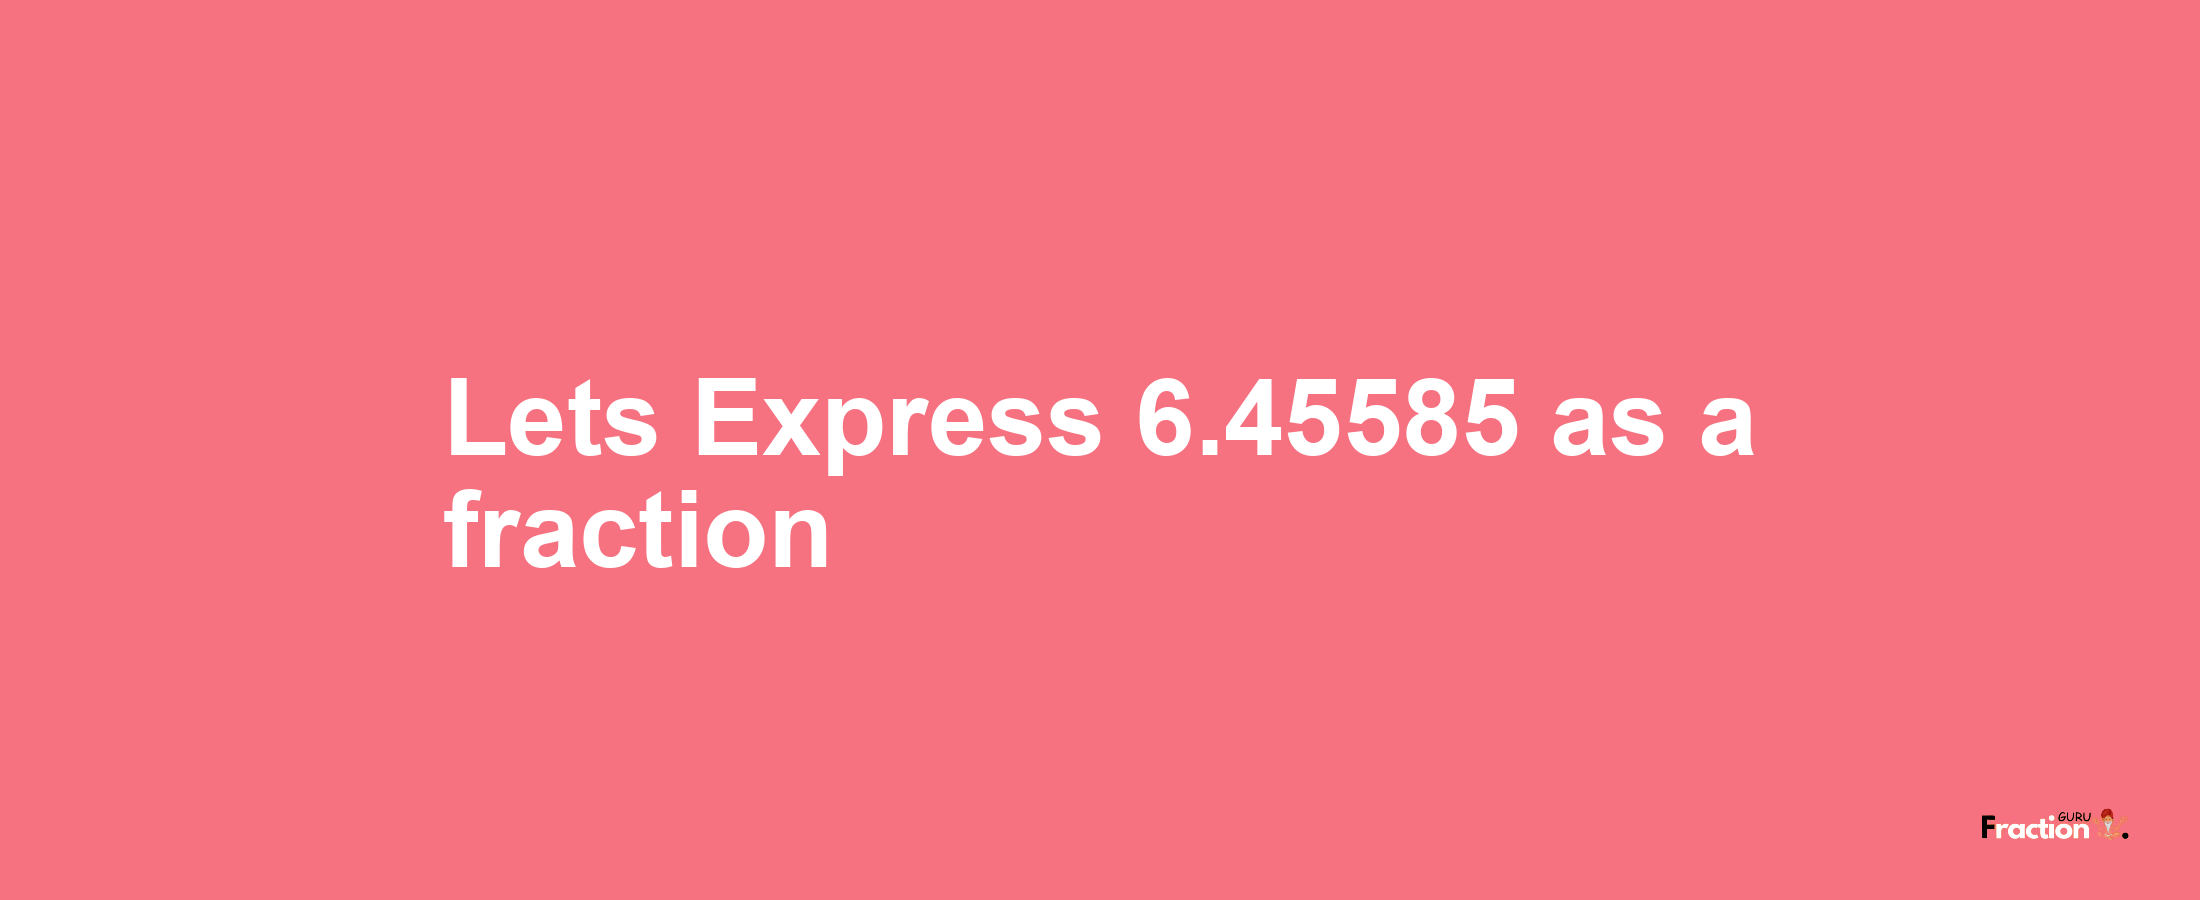 Lets Express 6.45585 as afraction